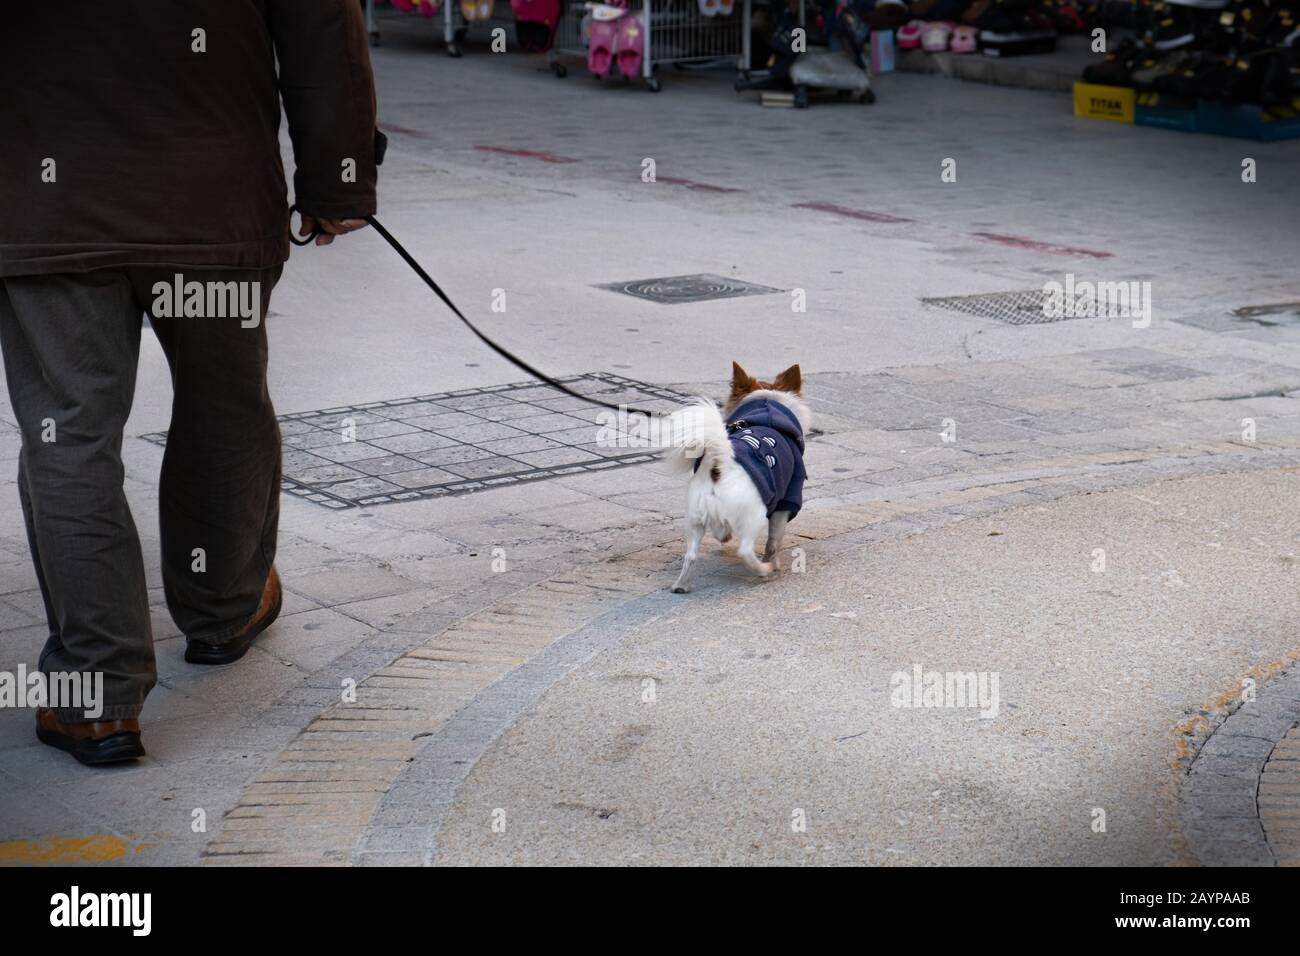 Unrecognized senior adult holding his white small dog walking in the streets Stock Photo